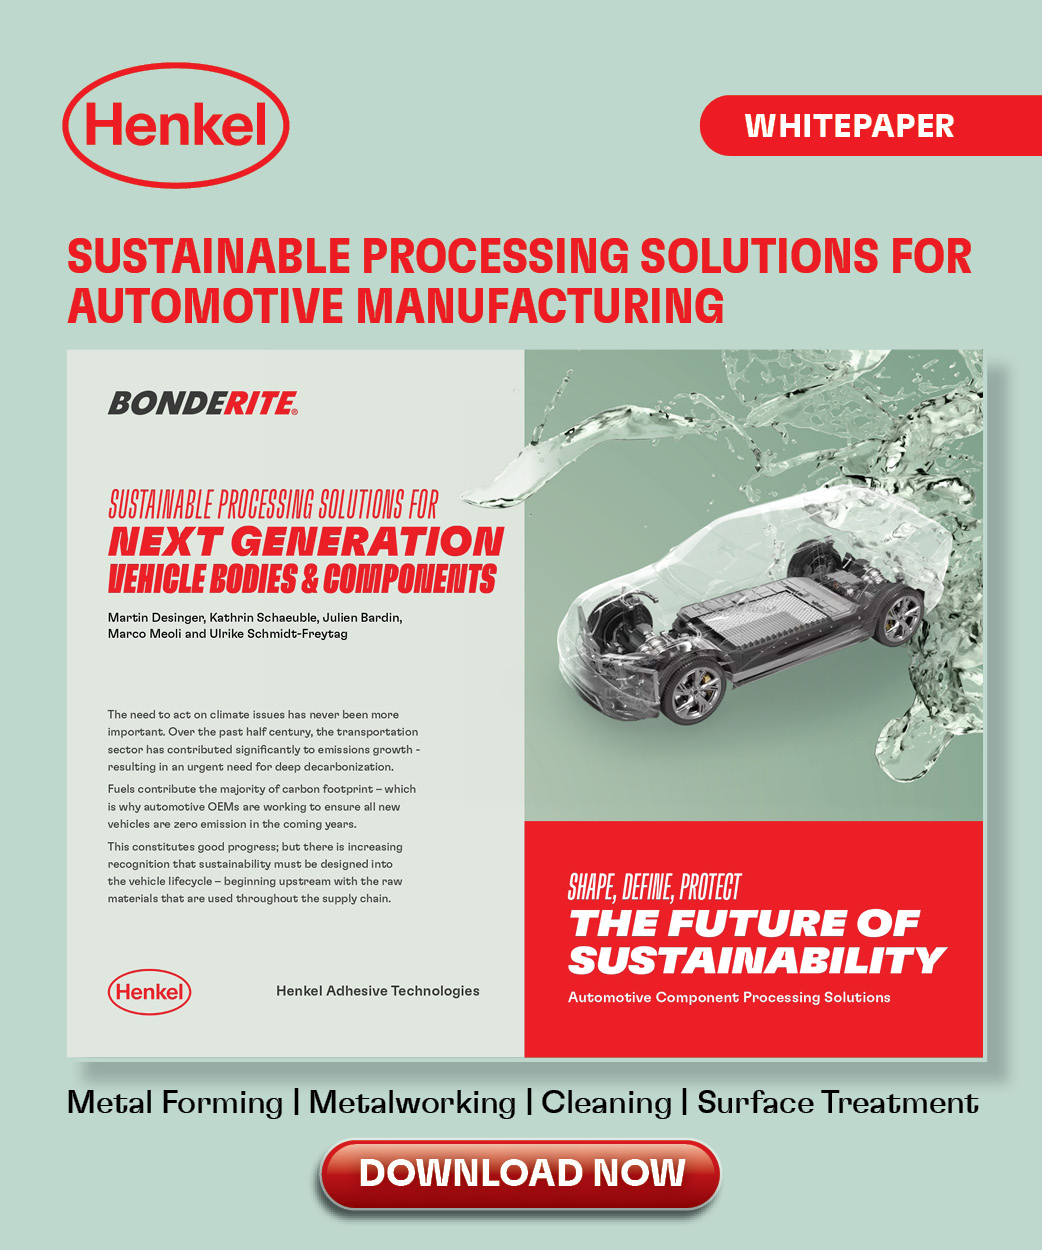 Illustration of car and offer to download Henkel white paper on sustainability